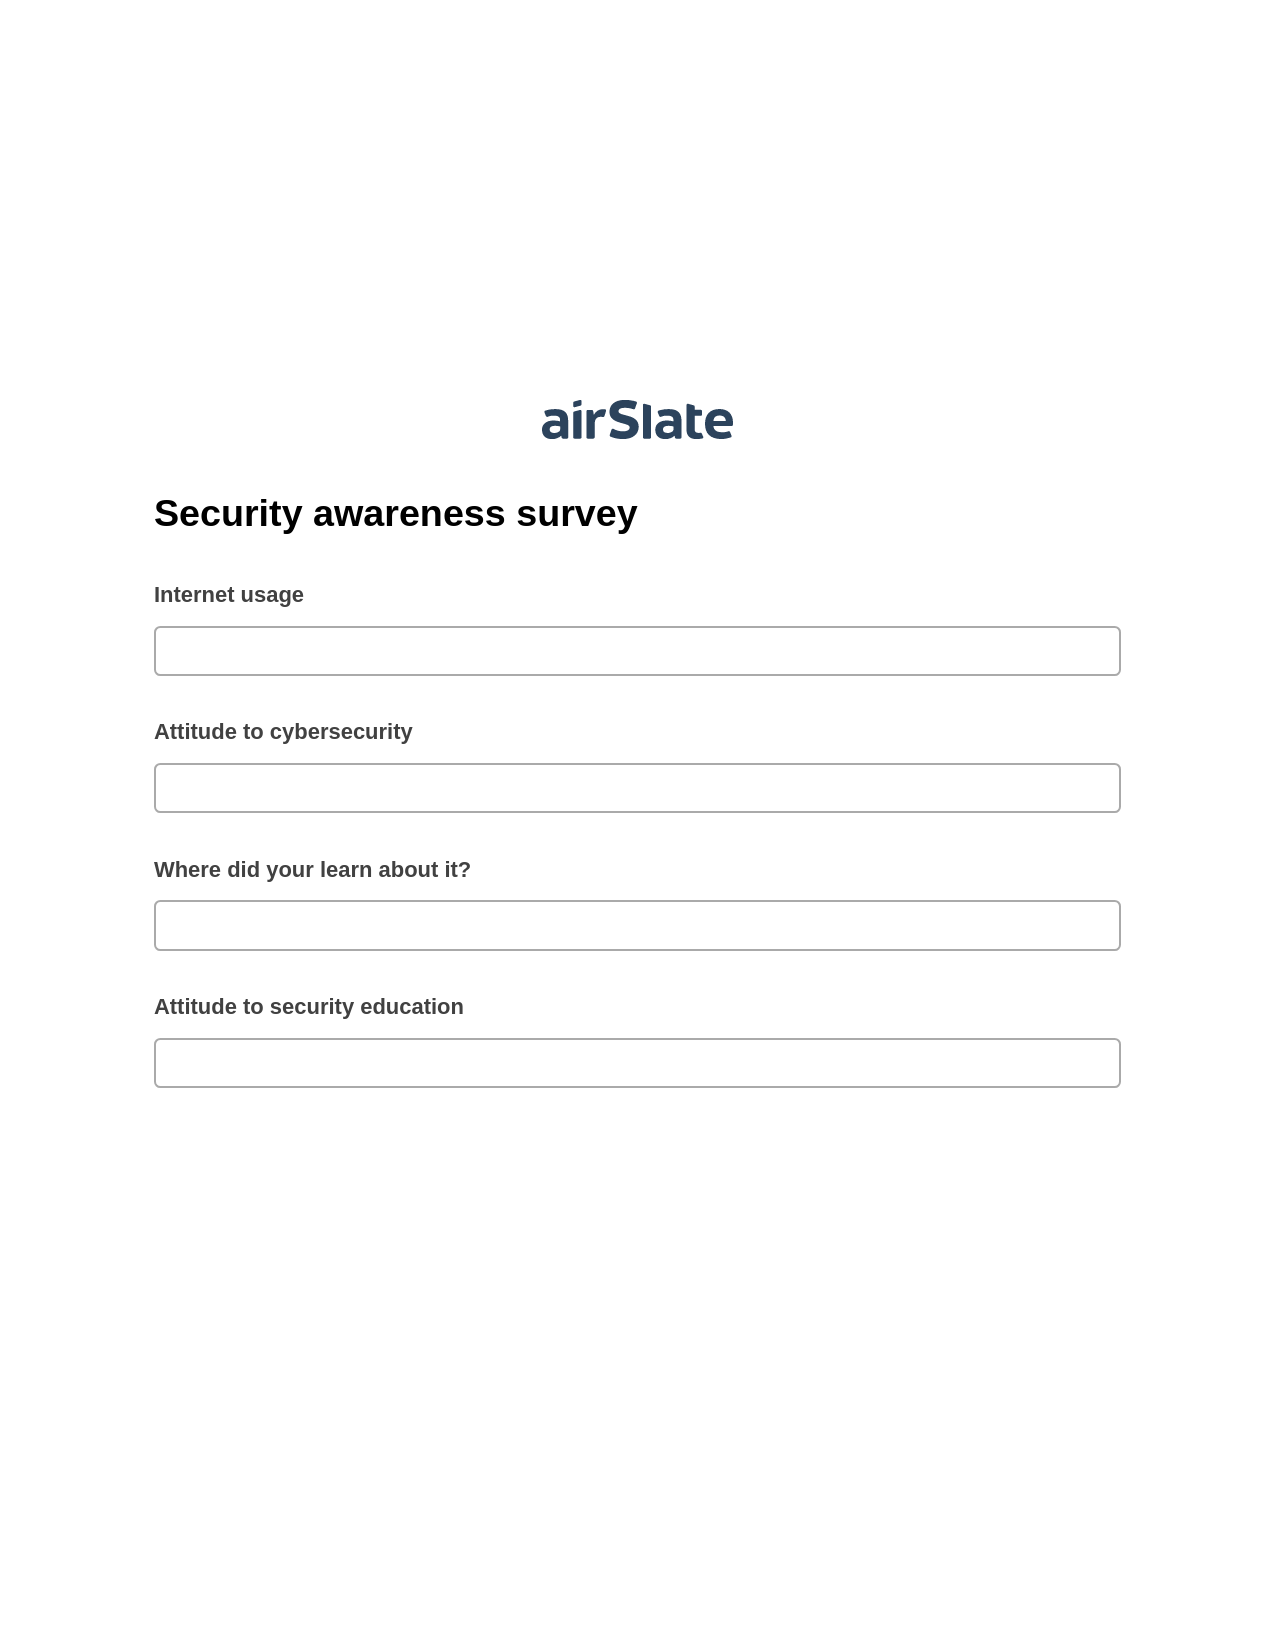 Multirole Security awareness survey Pre-fill from Salesforce Record Bot, Create Salesforce Record Bot, Archive to SharePoint Folder Bot